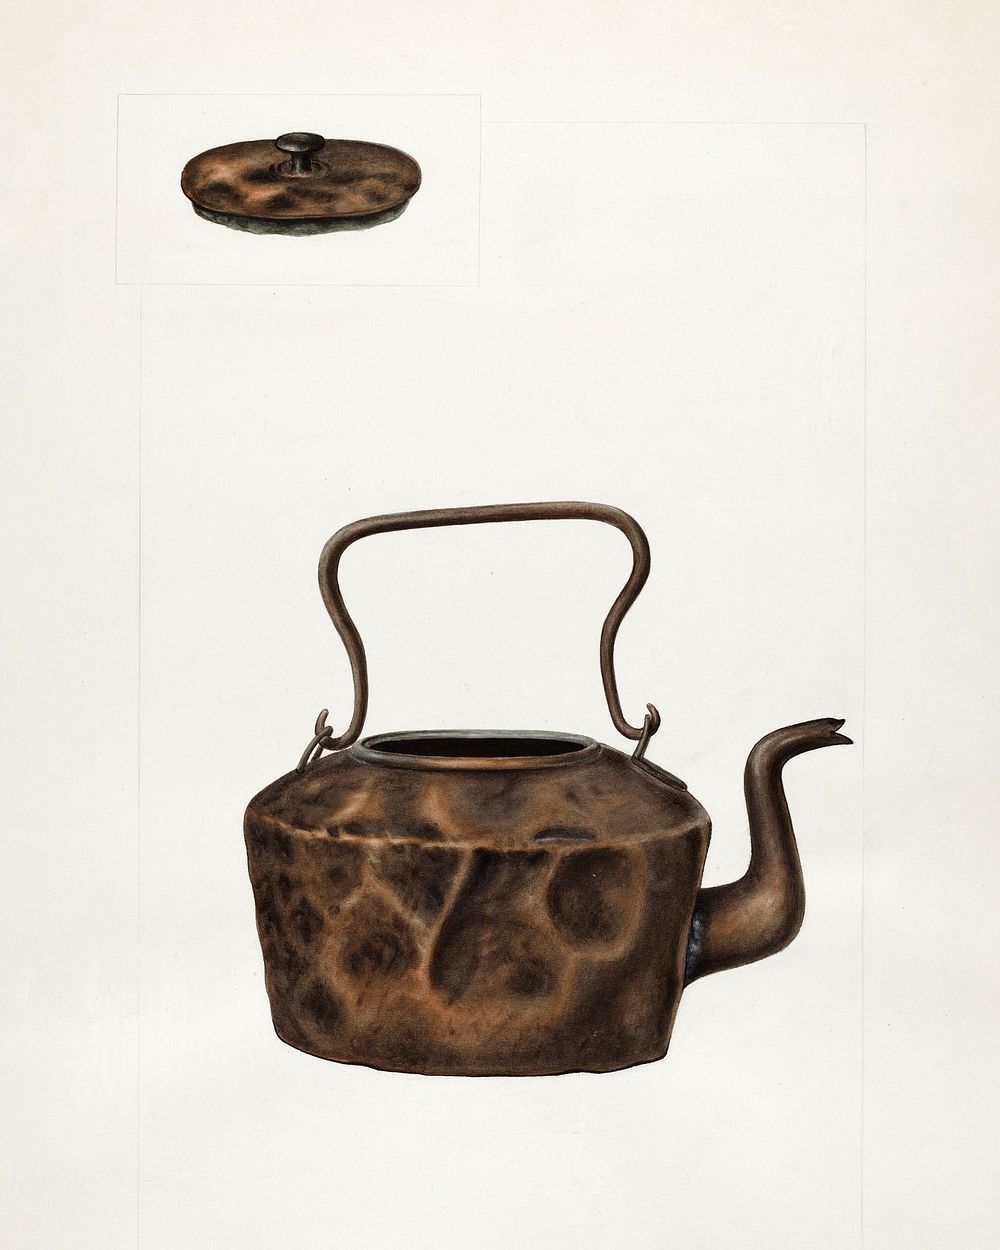 Copper Tea Kettle (1935&ndash;1942) by Clyde L. Cheney. Original from The National Gallery of Art. Digitally enhanced by…